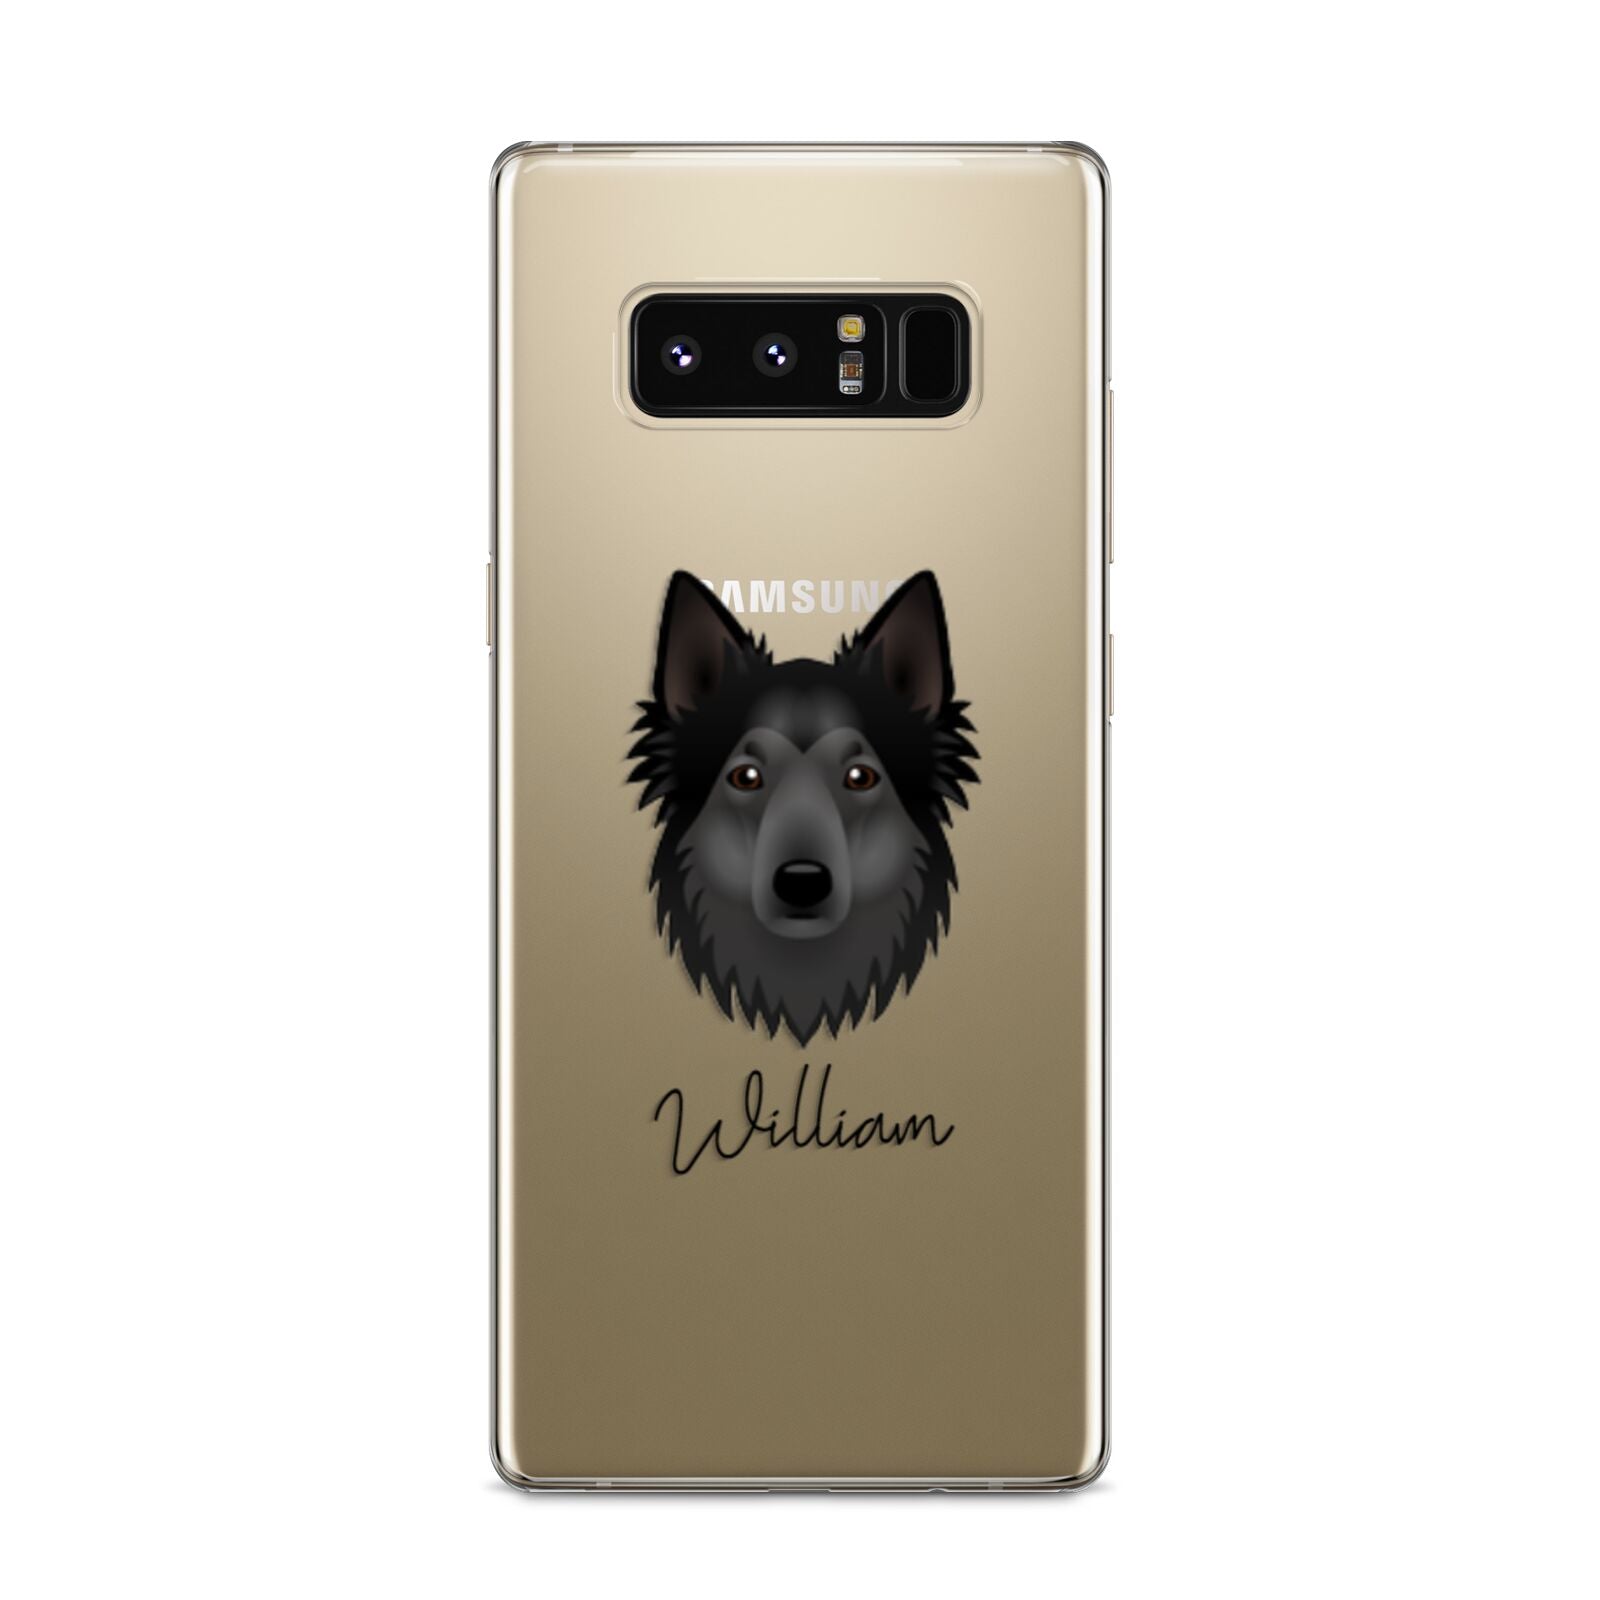 Shollie Personalised Samsung Galaxy S8 Case